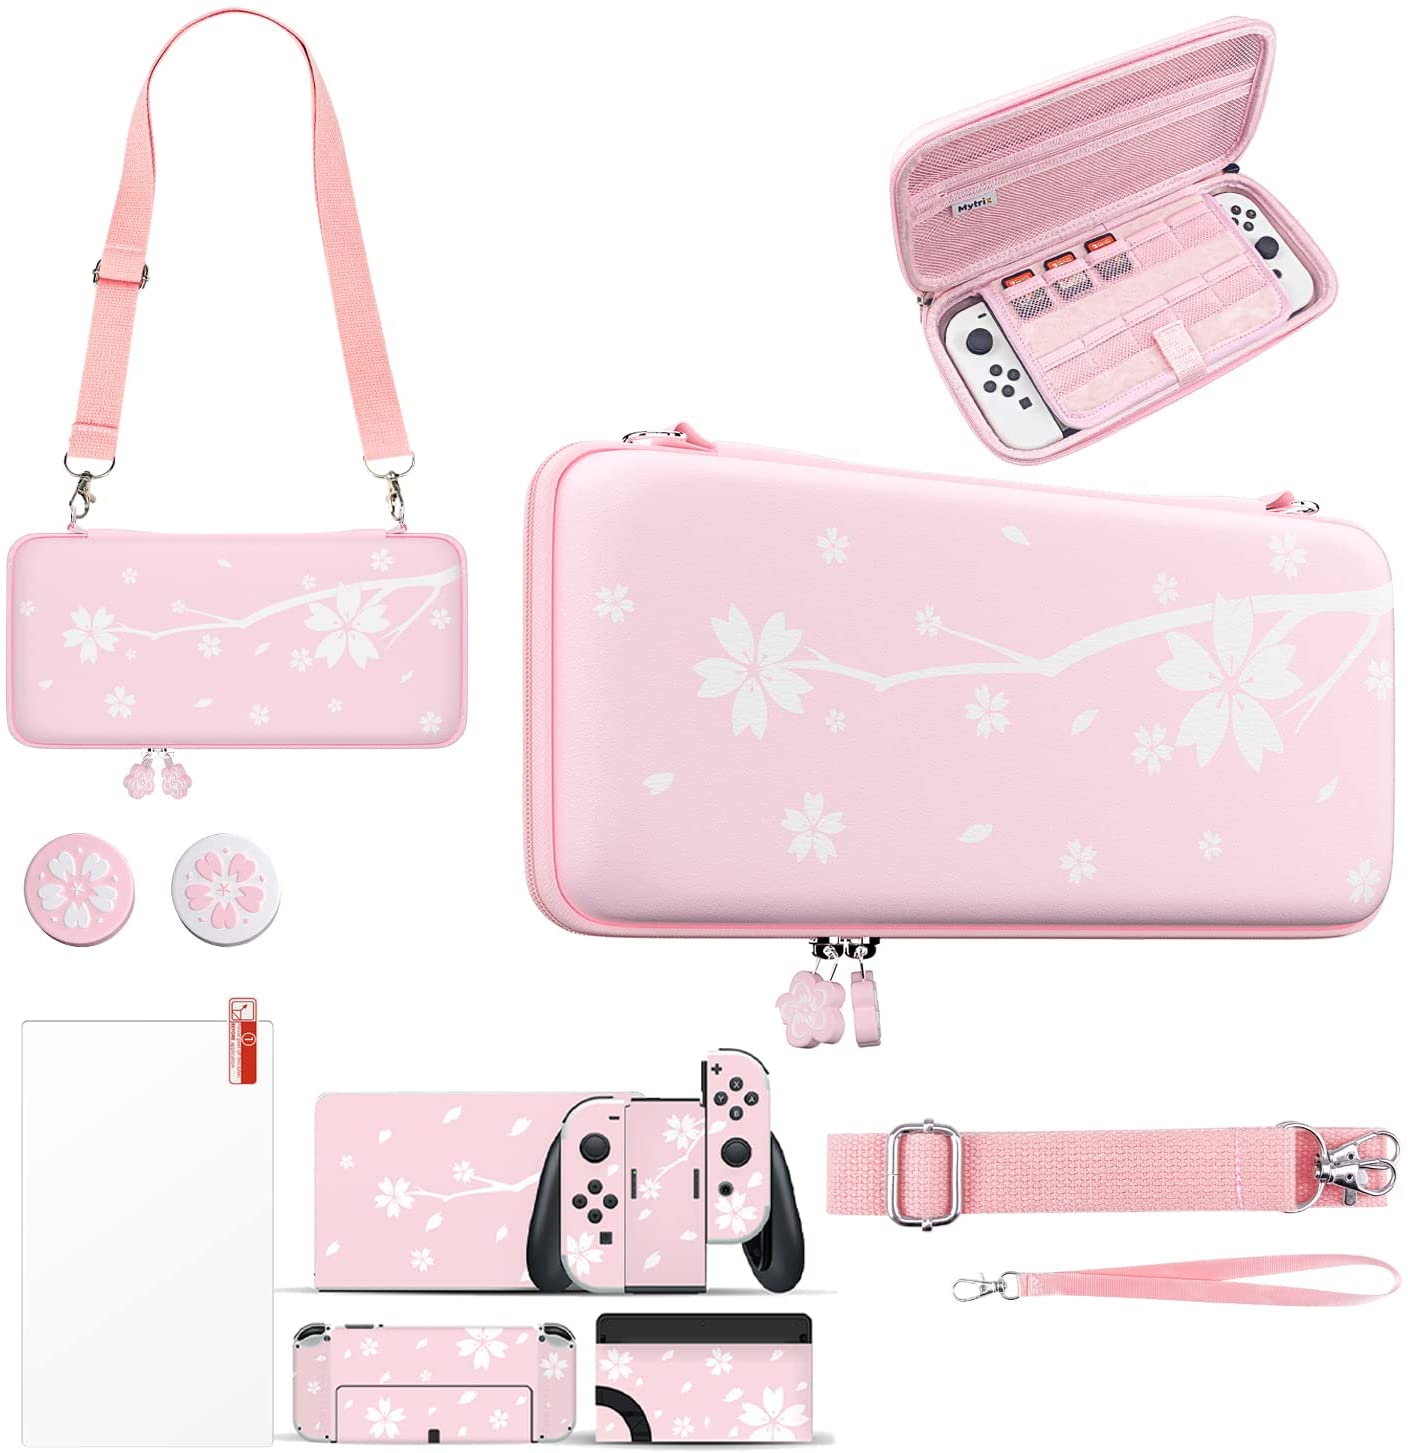 Mytrix Sakura Pink Carrying Case 4 in 1 Bundle for Nintendo Switch OLED,  Skin Stickers, Screen Protector, 2 Joystick Caps - Case & OLED Accessory